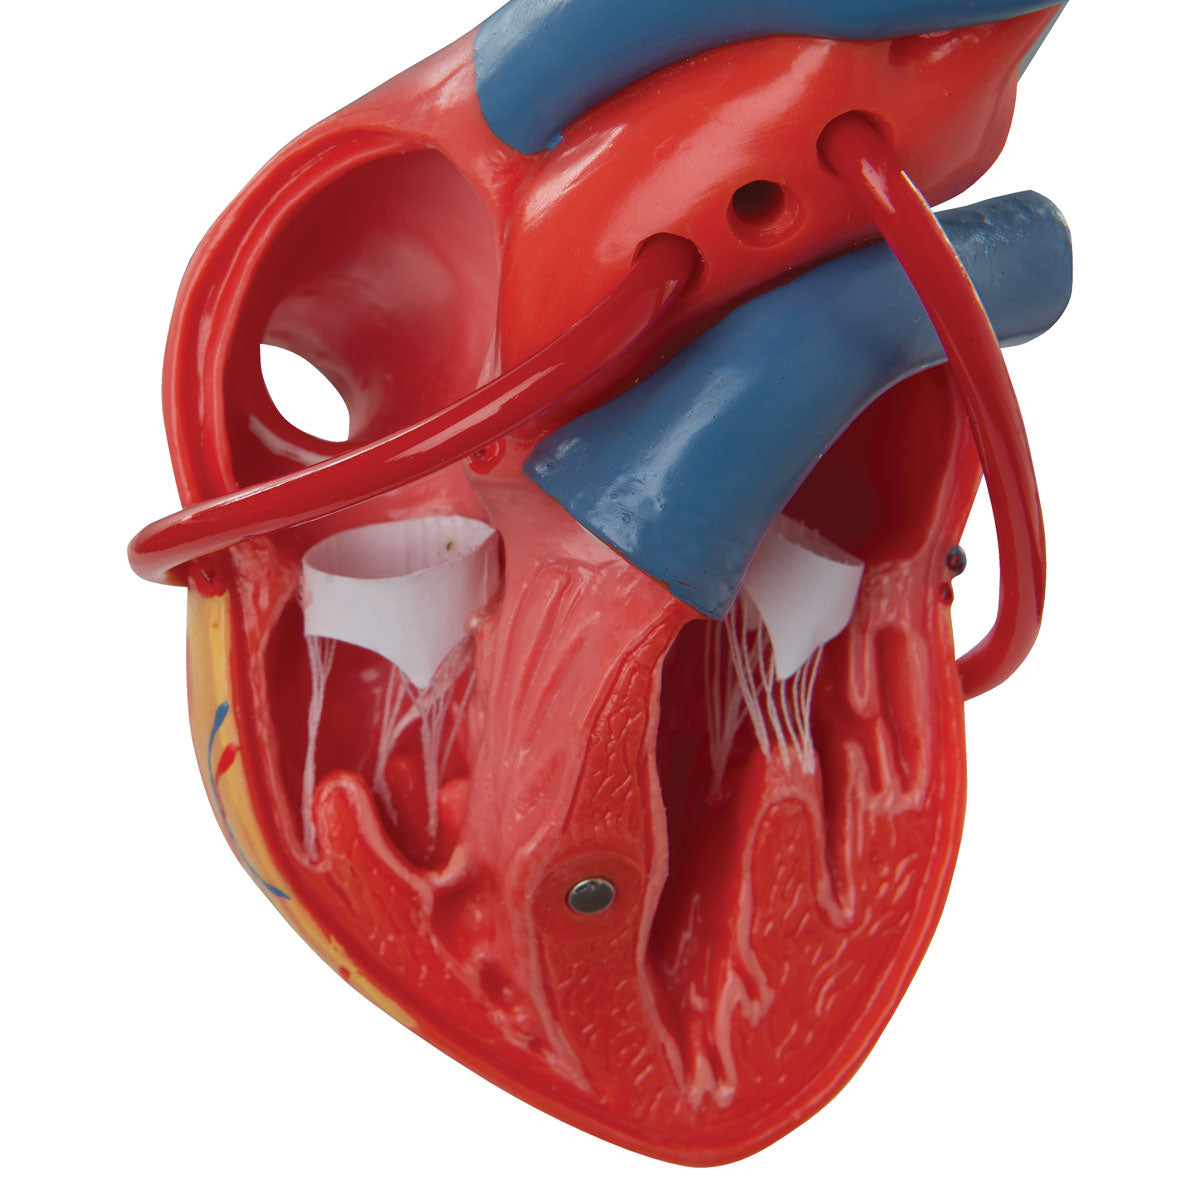 Heart model showing the result after a bypass operation